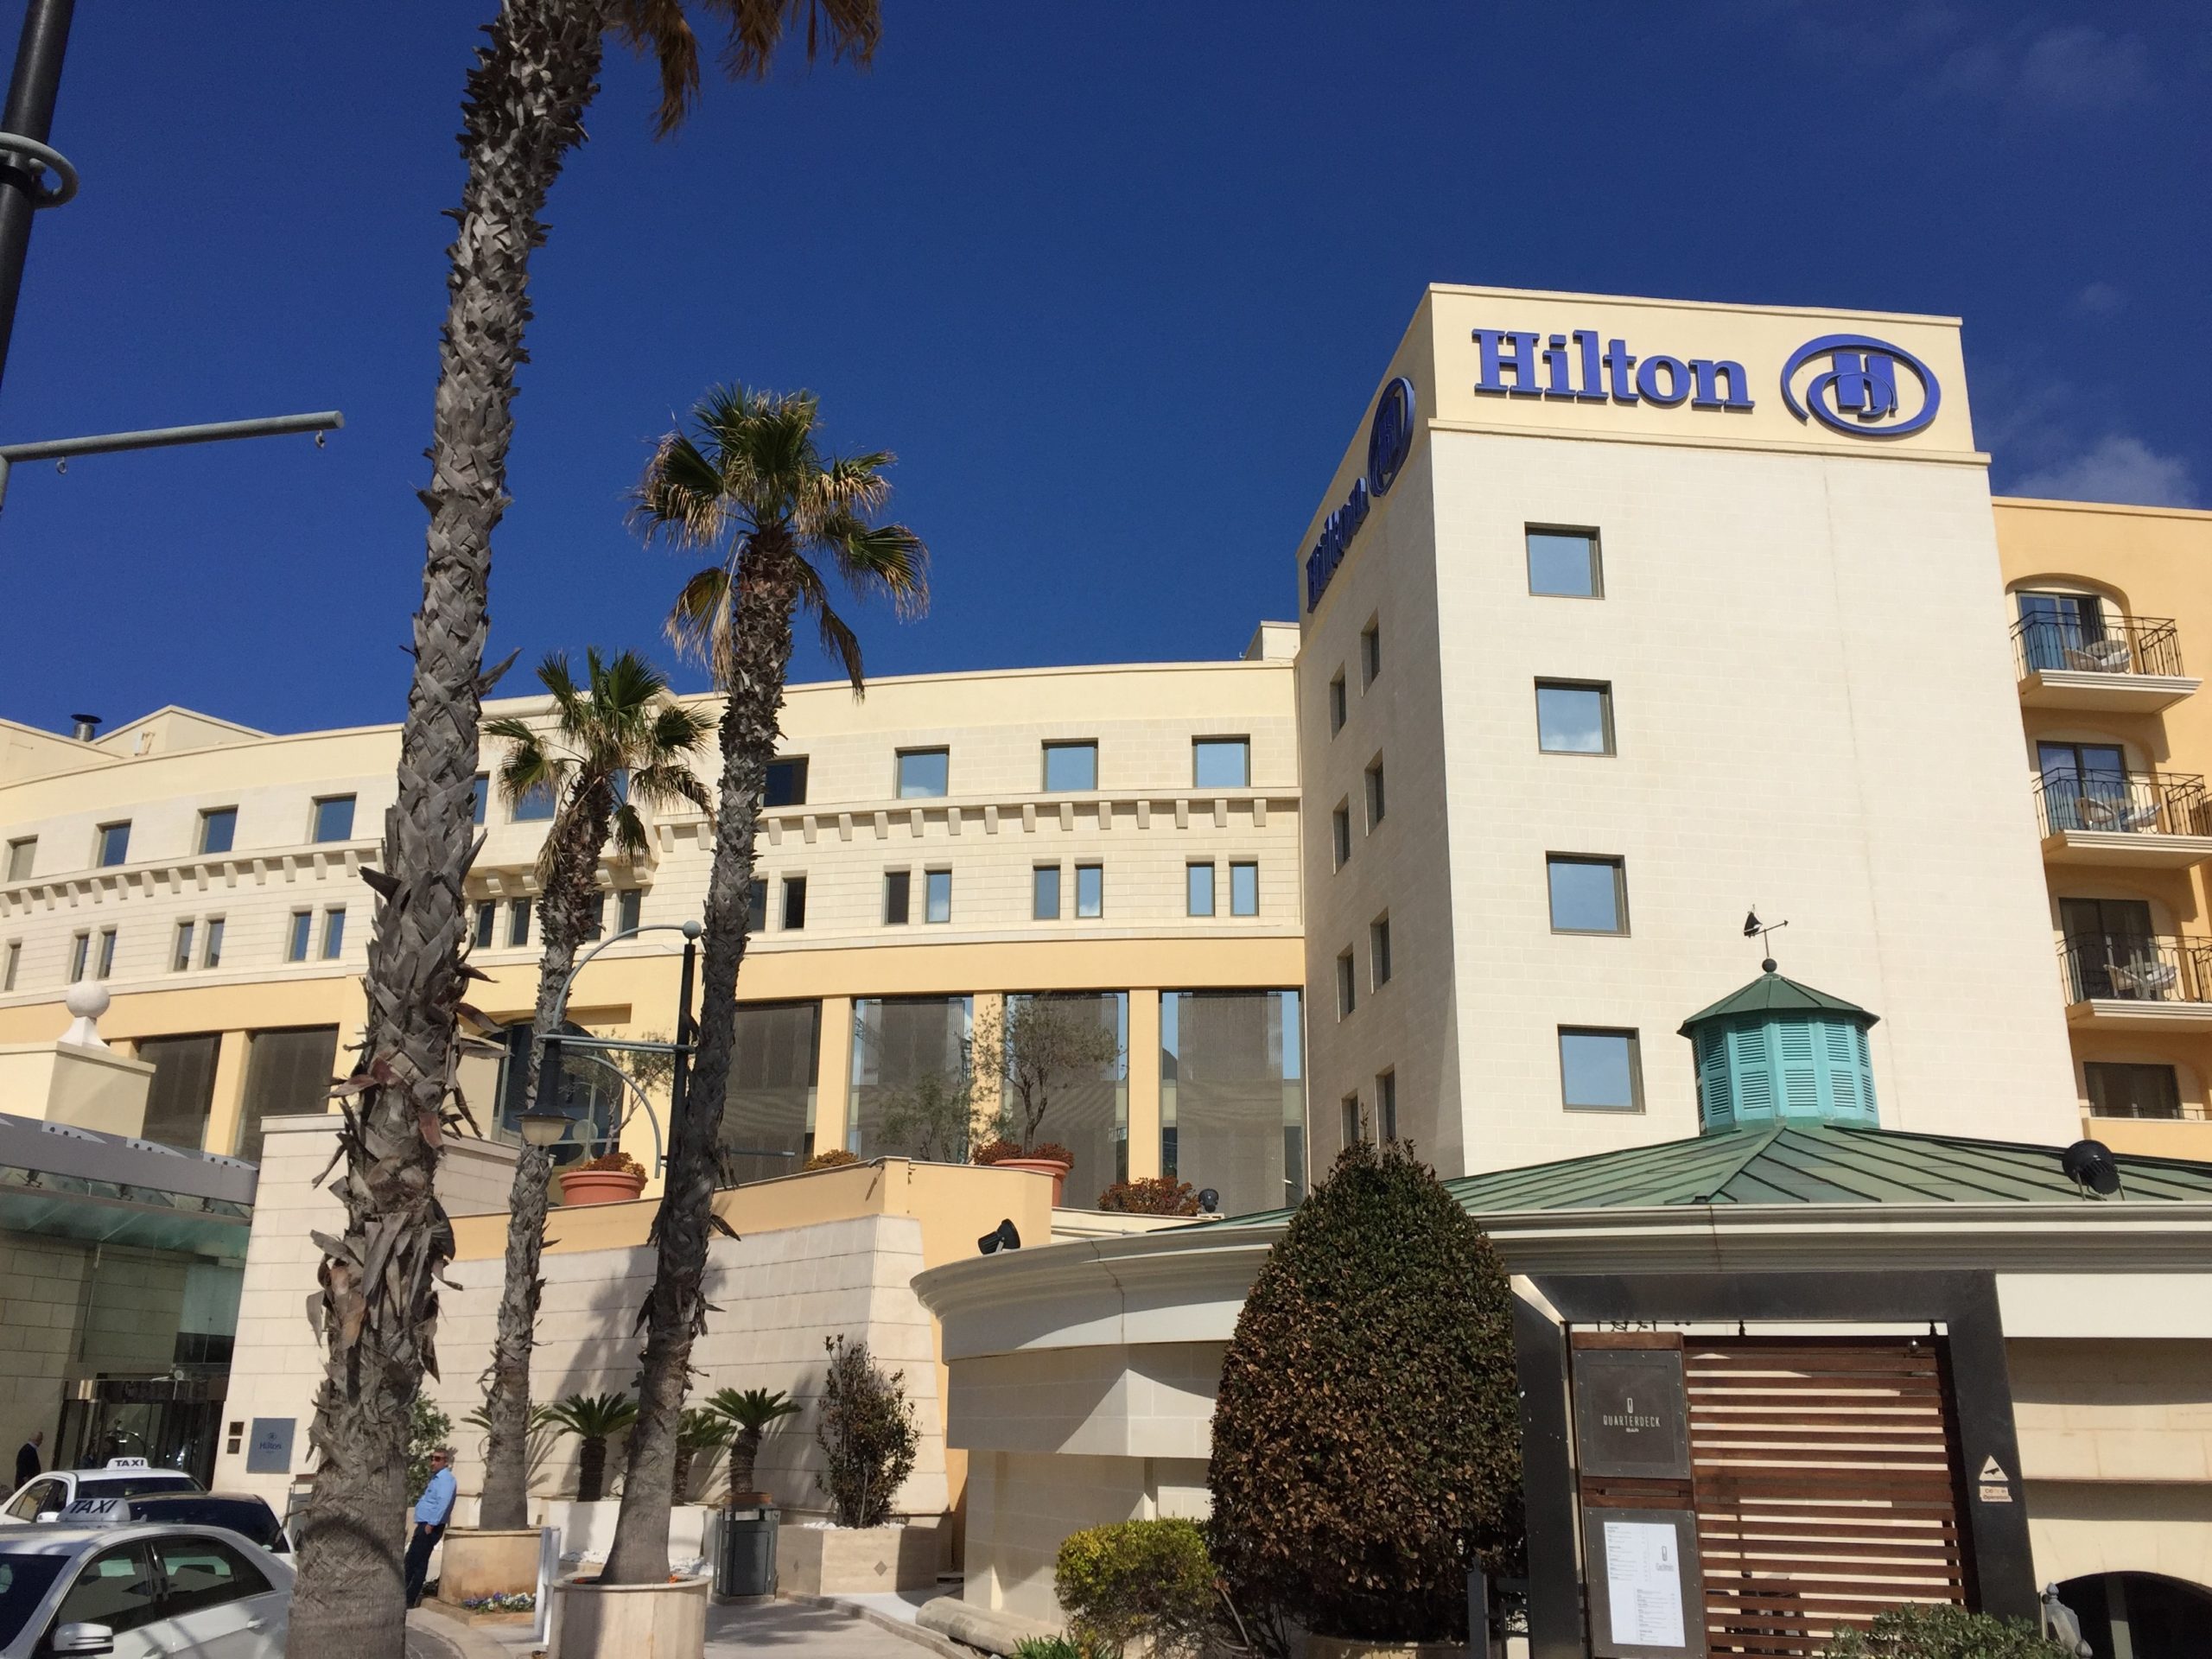 Permalink to Tutis Energy host an LNG workshop at the Hilton Hotel in Malta